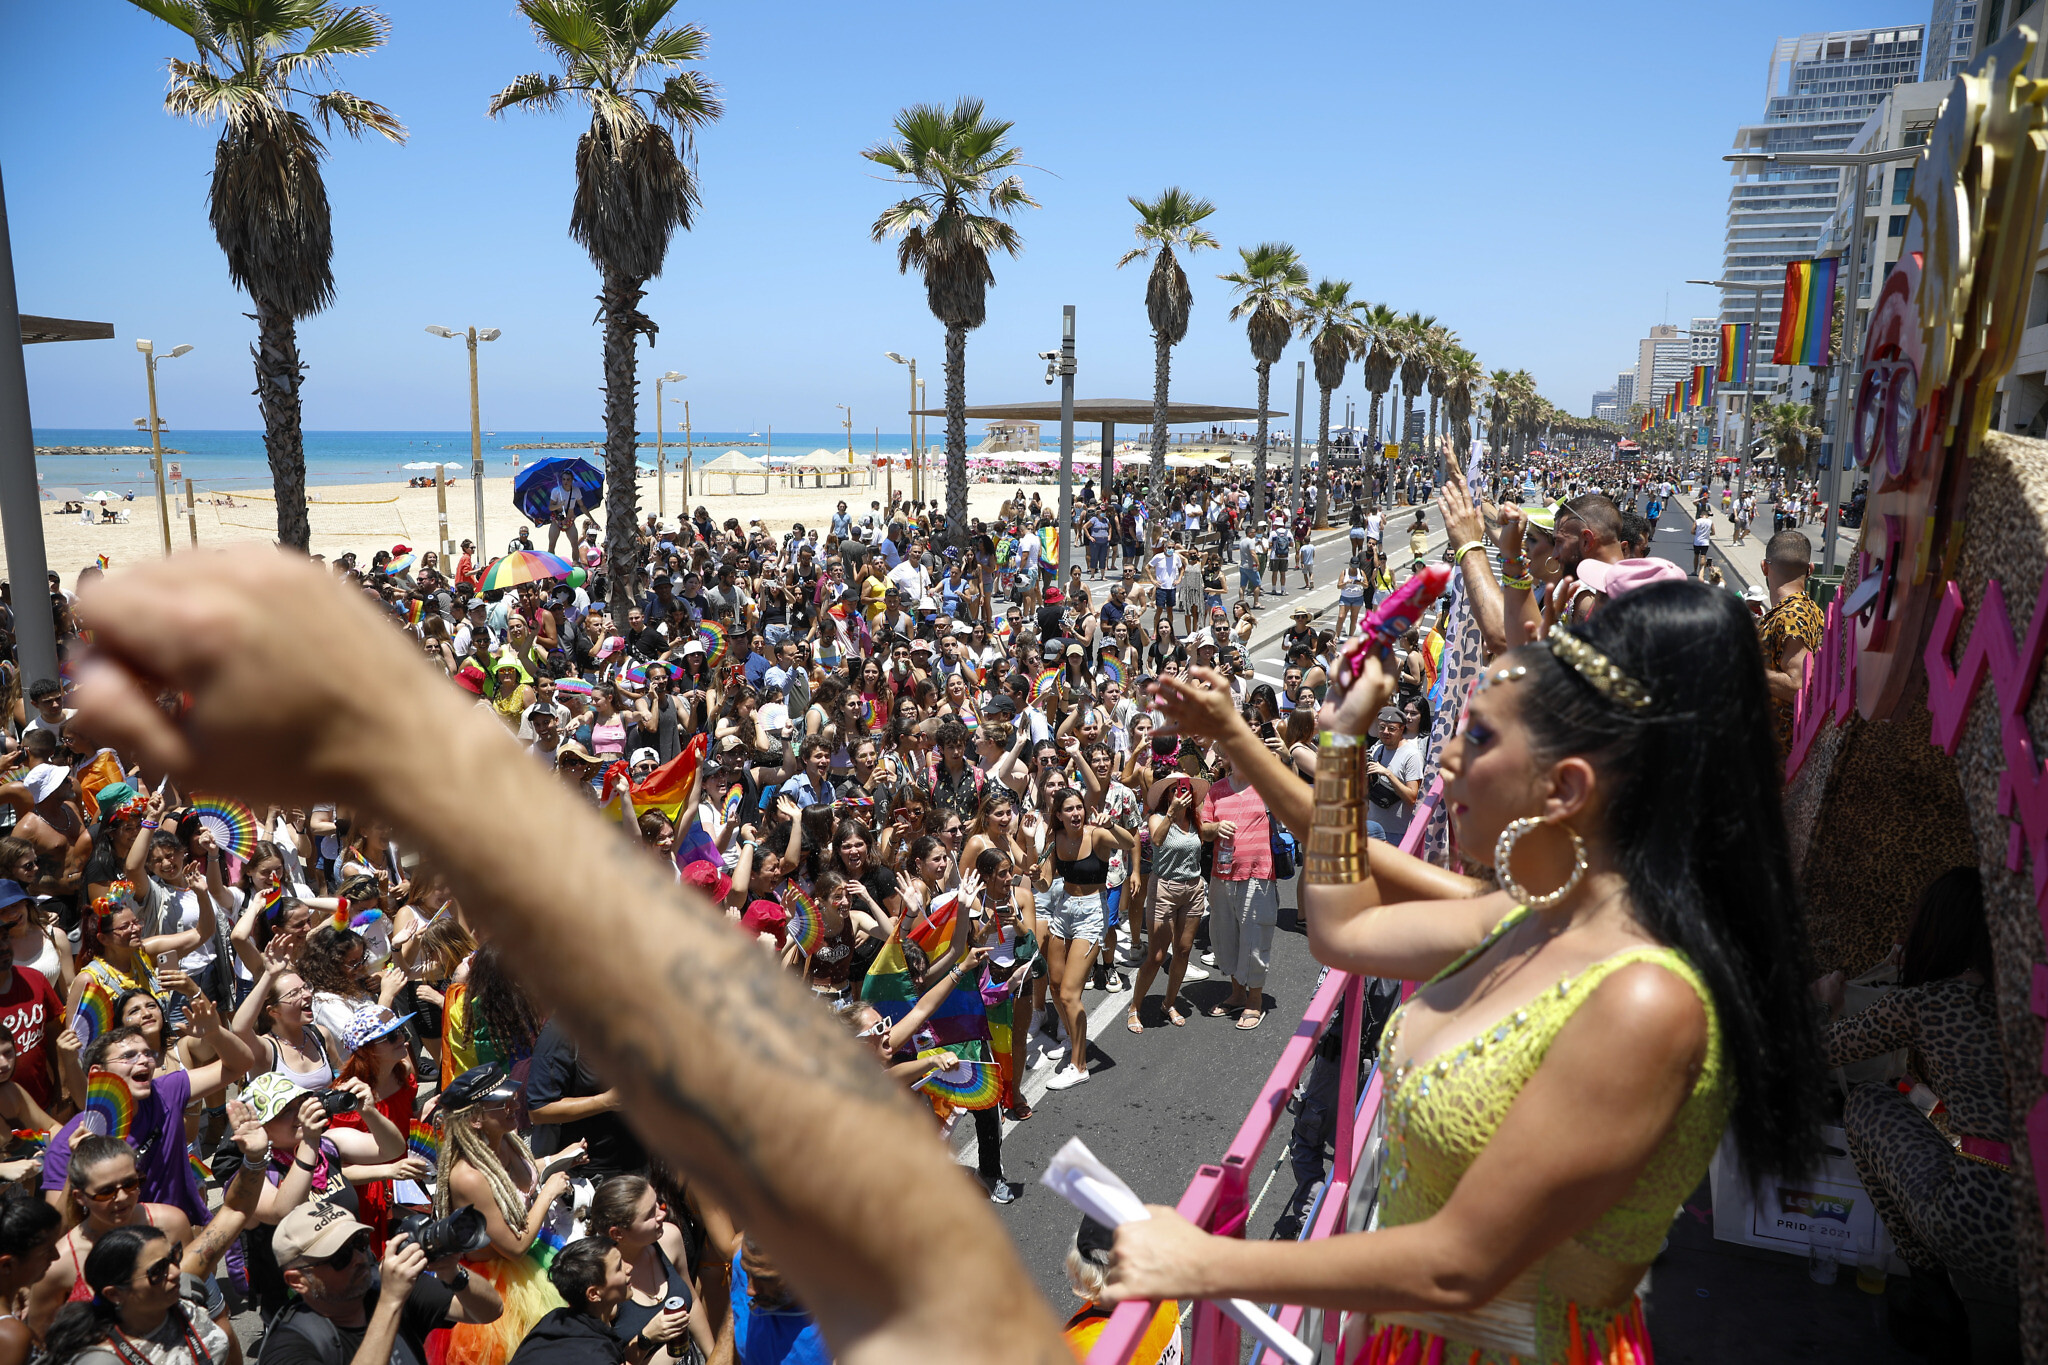 Tel Aviv Pride Parade returns with fanfare after last year's COVID